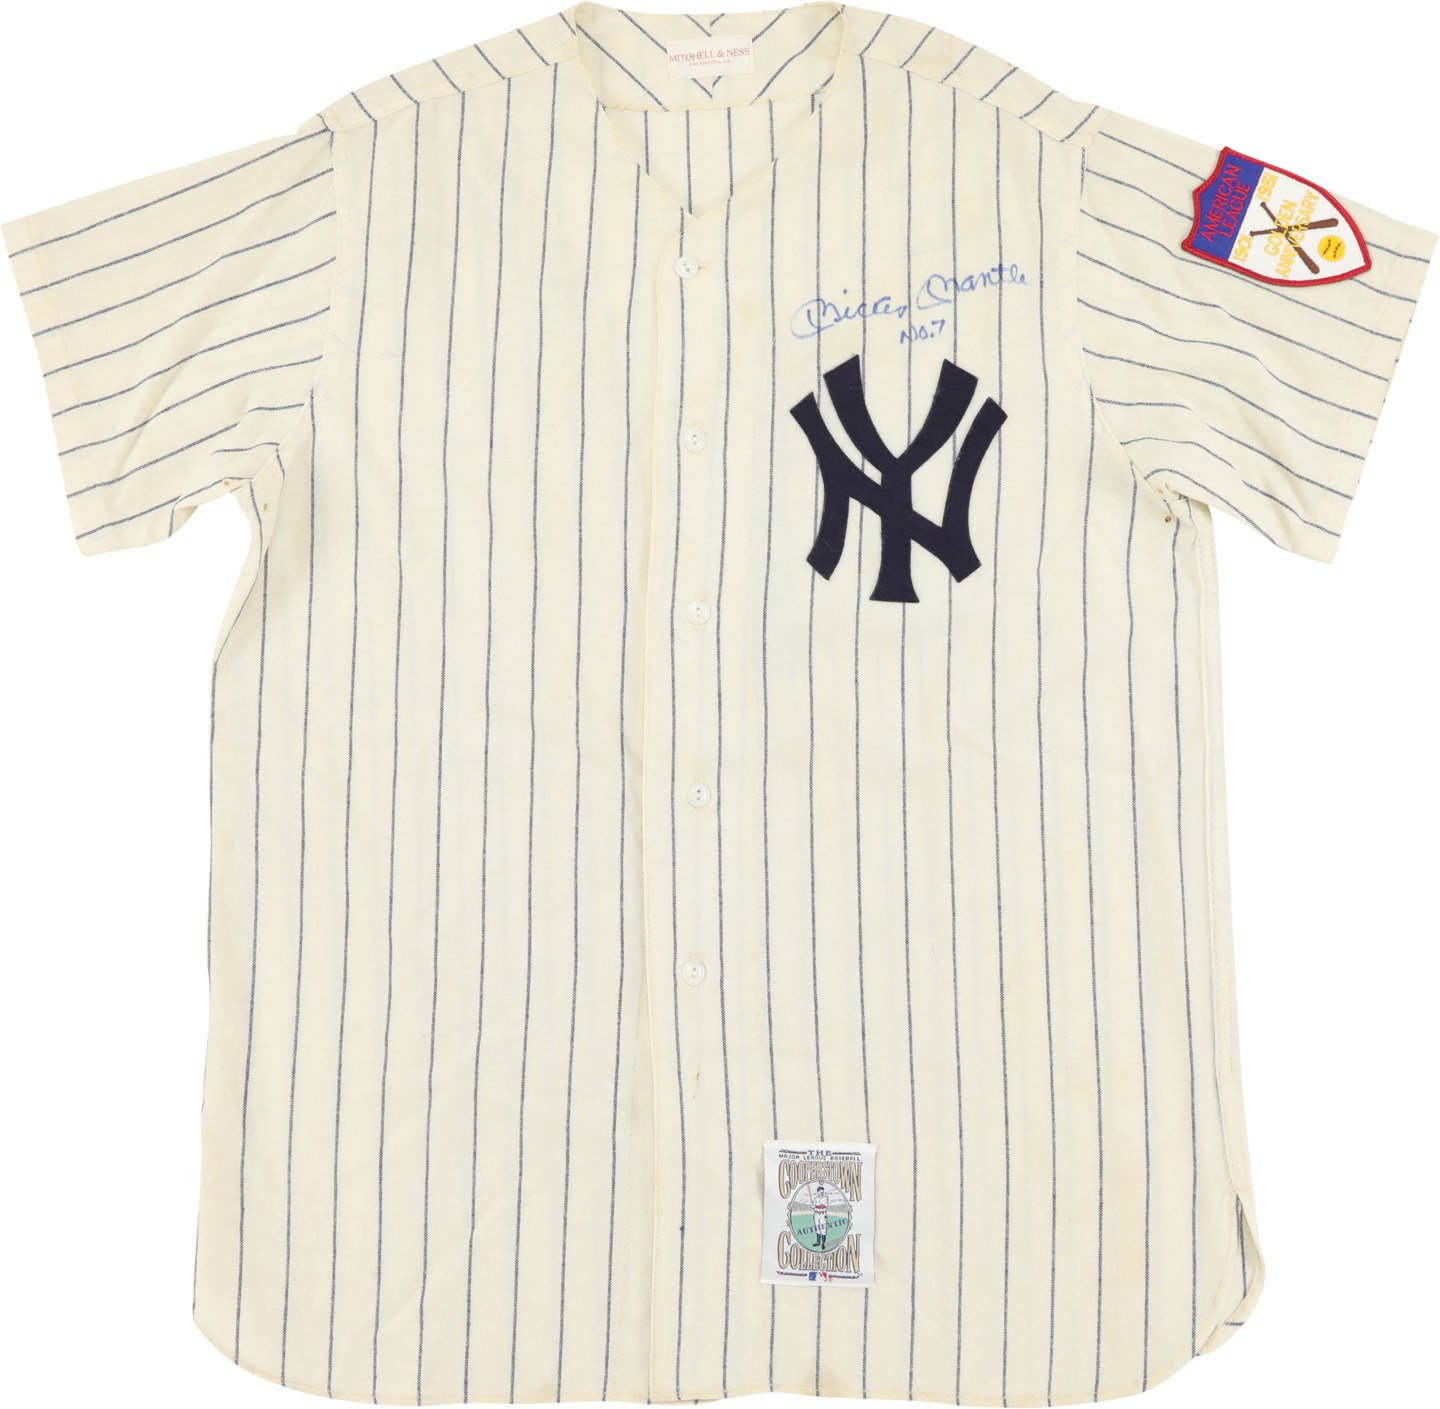 Mantle and Maris - Mickey Mantle "No. 7" Signed 1951 Mitchell and Ness New York Yankees Jersey